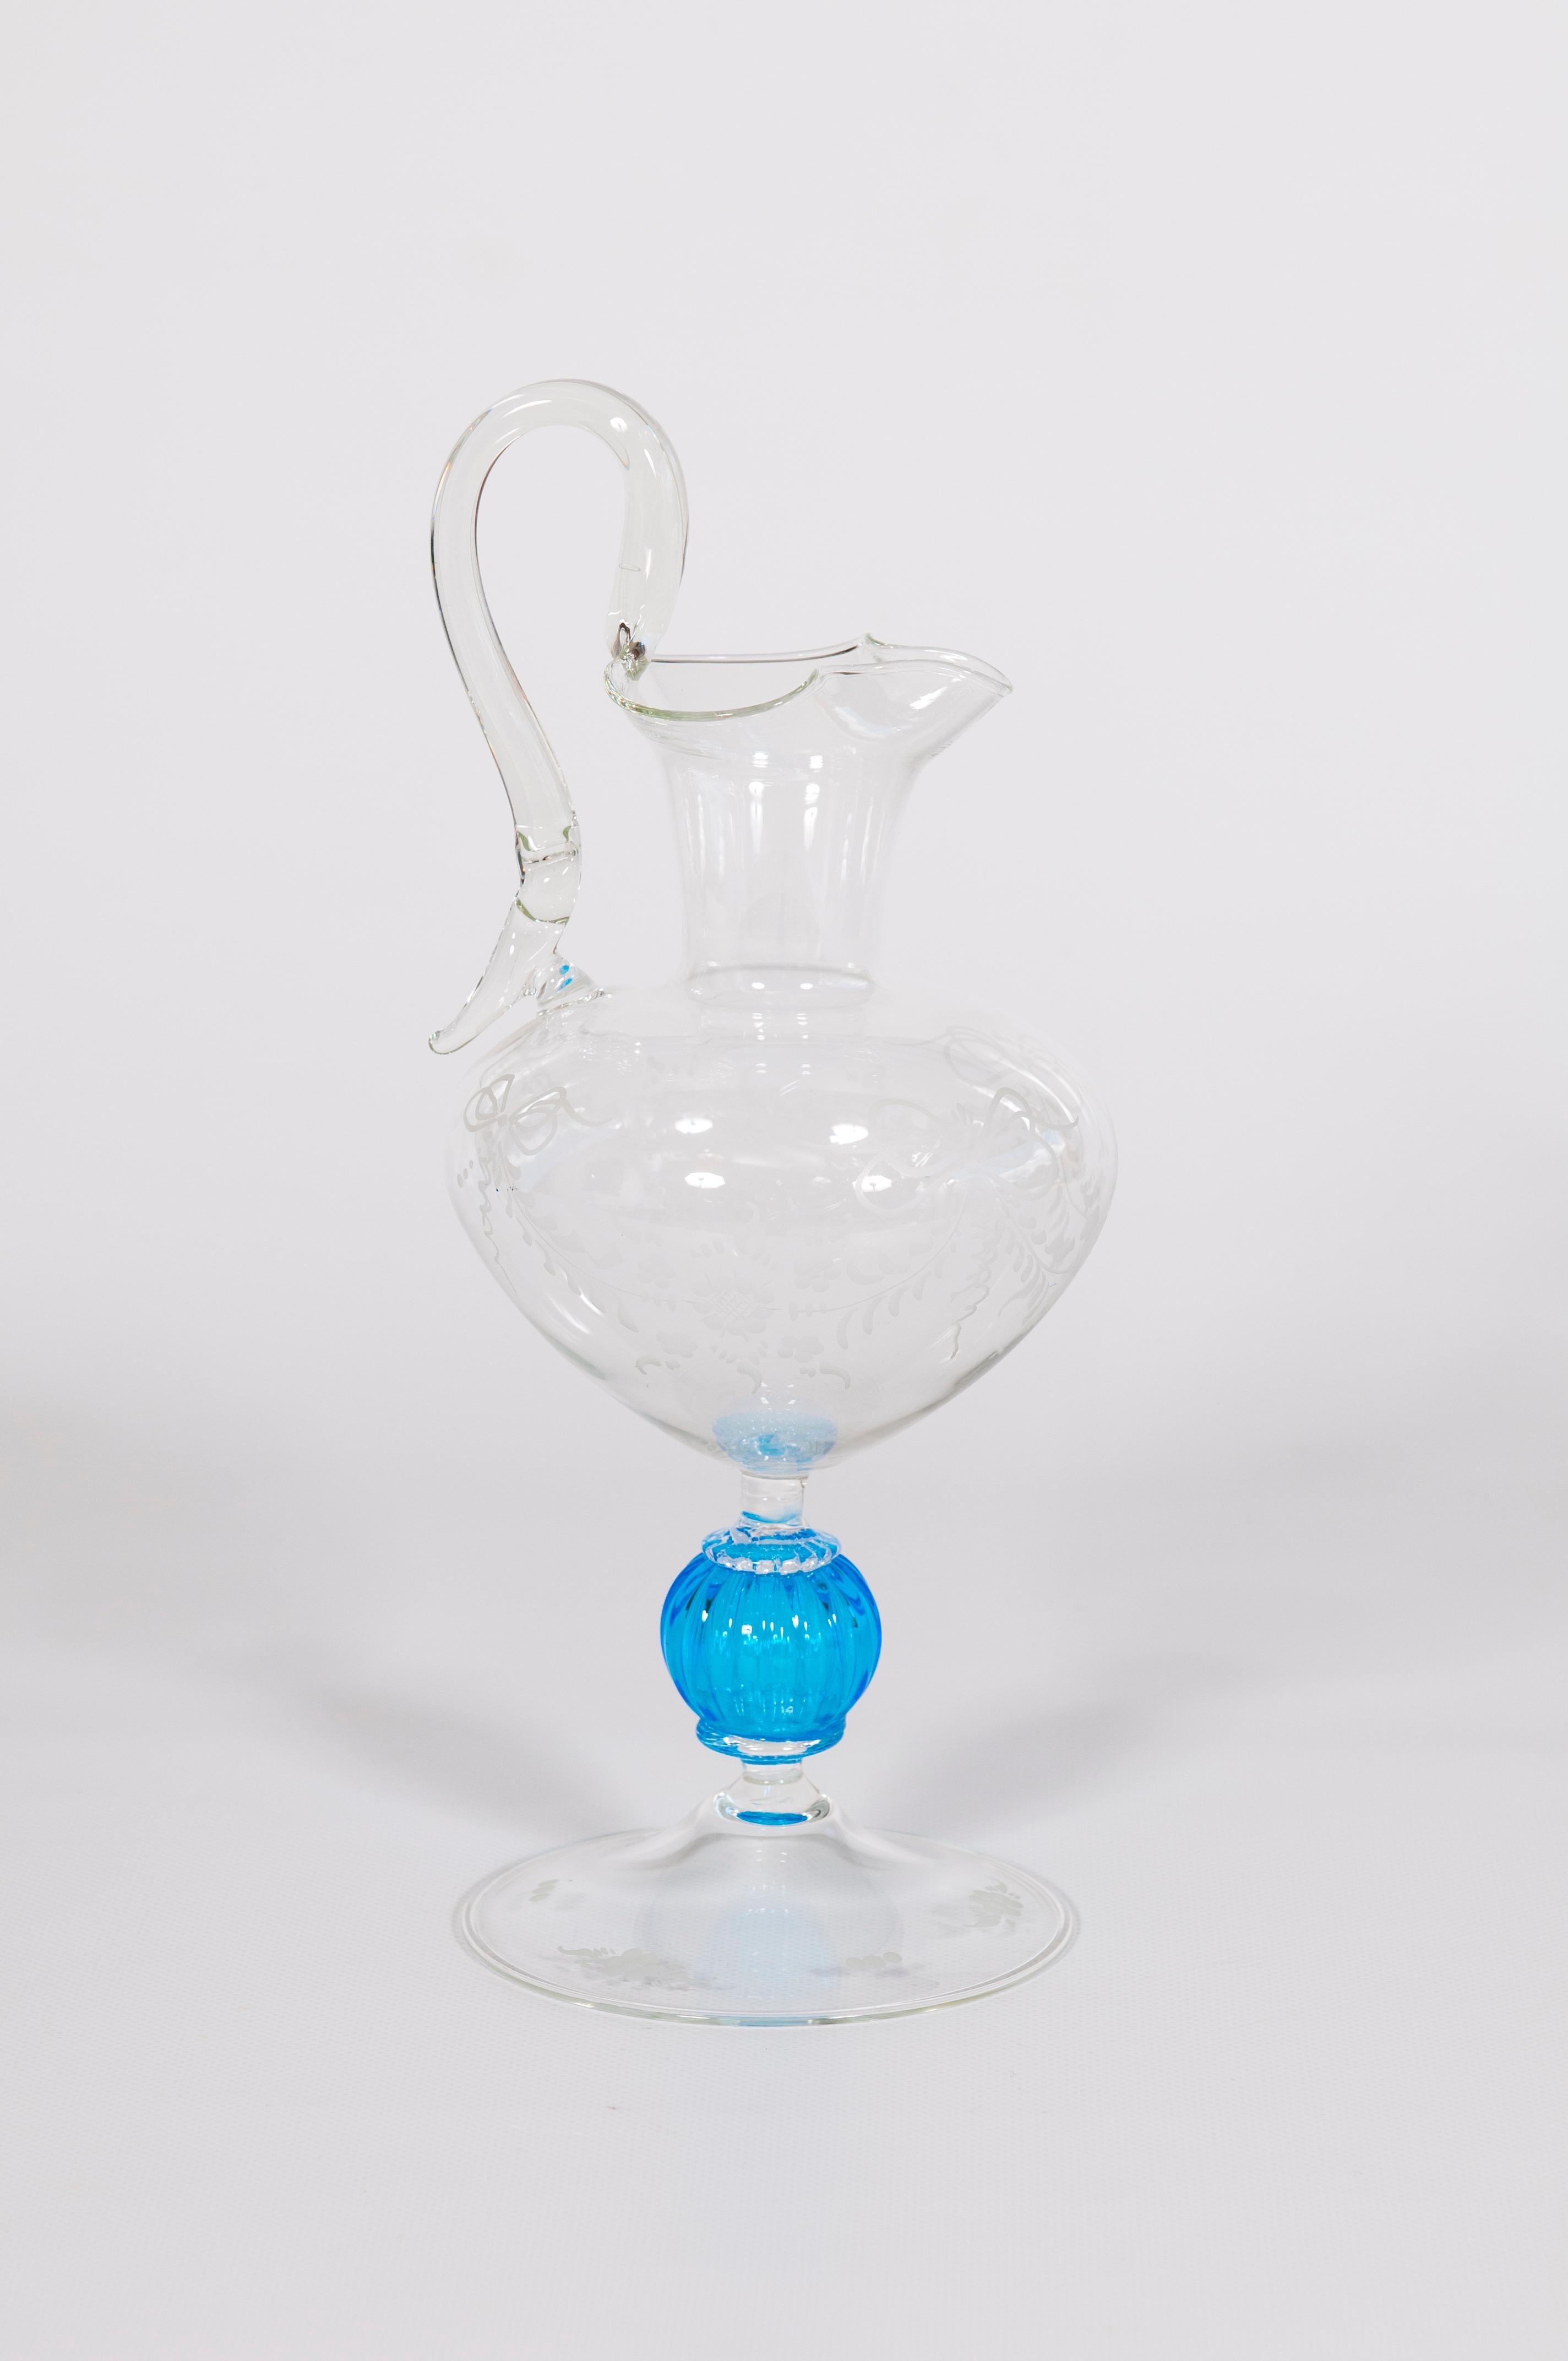 Italian Venetian Transparent and Blue Murano Glass Carafe Contemporary 1990s. 
This amazing and unique Venetian work of art was made in the island of Murano in the 1990s. It was entirely handcrafted by local glass artists following the ancient